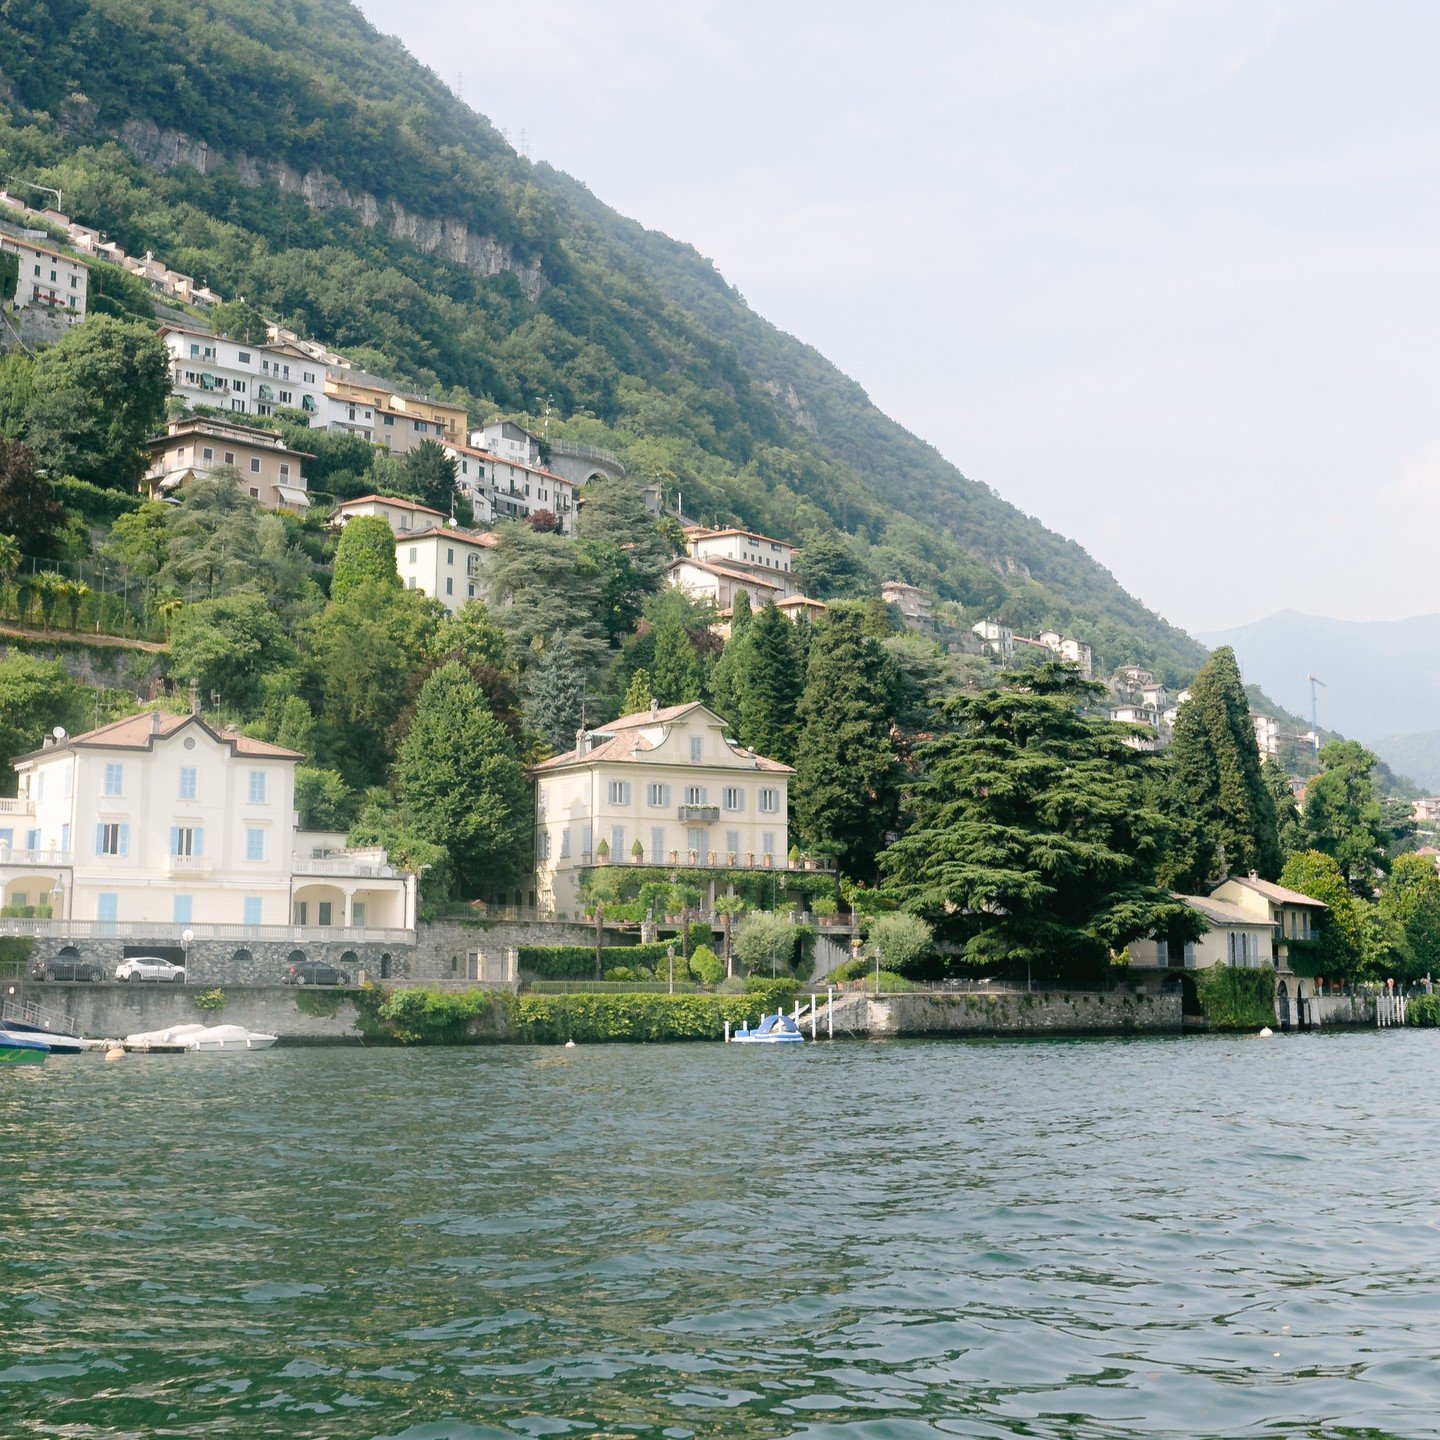 Landscapes to fall in love with ❤️ lake of Como.

Im ready for a little bit sunshine myself, will be out of office for a few days 😎. 

#villateodolinda #destinationwedding #lakecomo #weddingphotographer #weddinginitaly #fineartphotography #instabrid